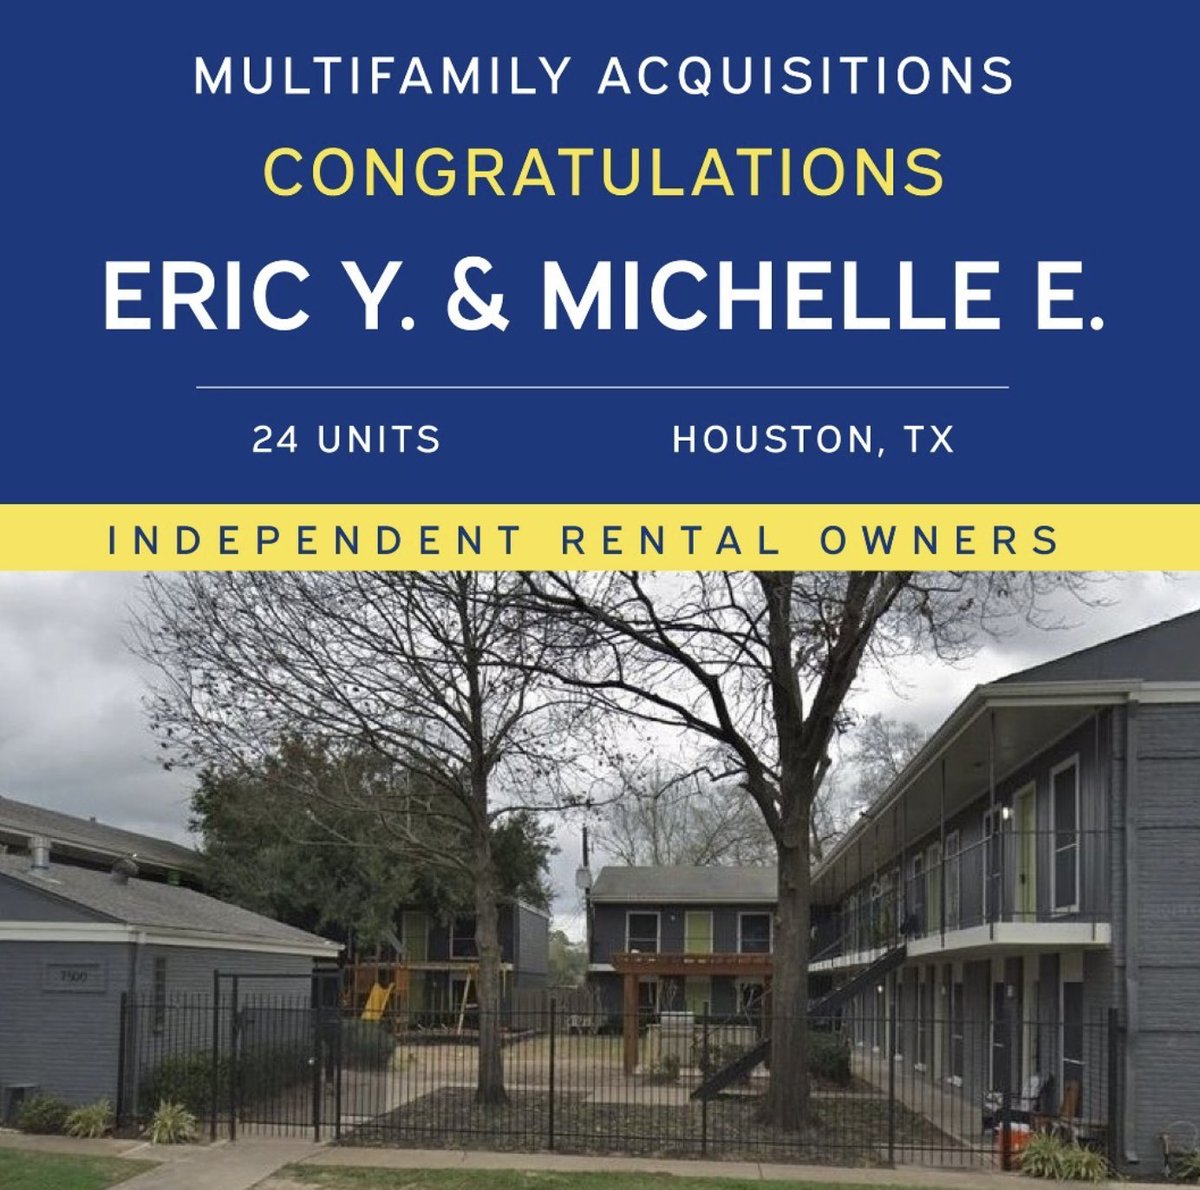 luinc: 🎉 Congratulations Eric Y. & Michelle E. on your recent Multifamily Acquisition as IRO 👏

#multifamilyinvesting #multifamilyrealestate #lifestylesunlimited #passiveincome #realestateinvesting #retireearly #investinginrealestate #investing